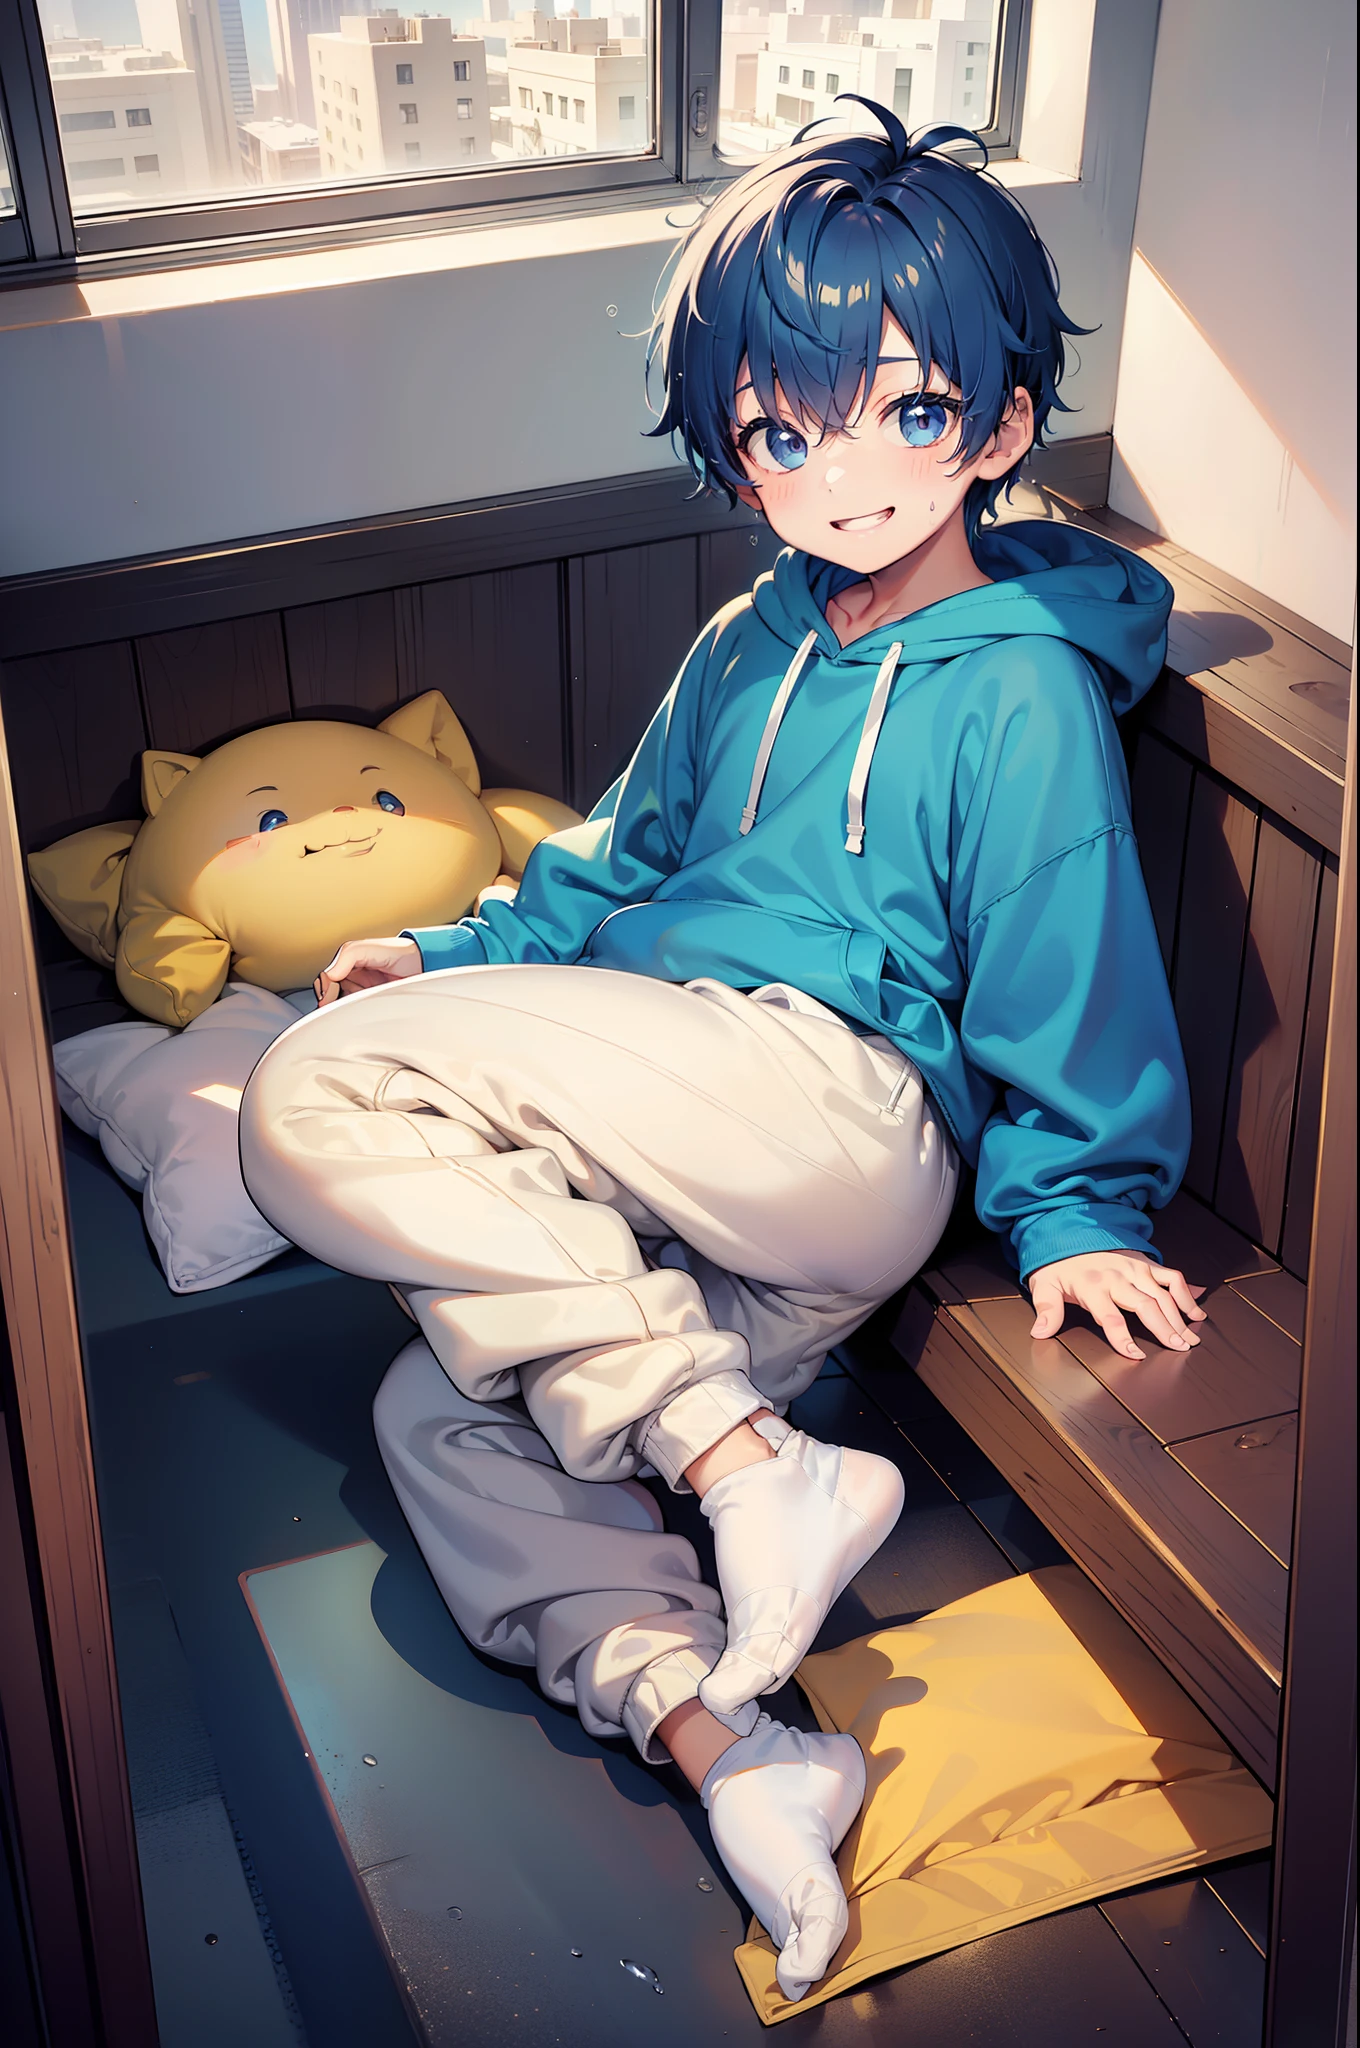 obra maestra, chubby Little chico with blue hair and shiny bright gold colored eyes and pequeño socks wearing a hoodie, and oversized pantalones deportivos sitting in a his room, lloviendo fuera de la ventana, joven, chico, , pequeño, niño pequeño, luz tenue, (pantalones deportivos:1.4), (calcetines de tamaño insuficiente:1.4), (chico:1.4), (Shota:1.4), (joven:1.4), (Male:1.4), (sonriente:1.4), (pie:1.4), (tímido:1.4), (pastel:1.0), (colores:1.0), (cute colores:1.0),